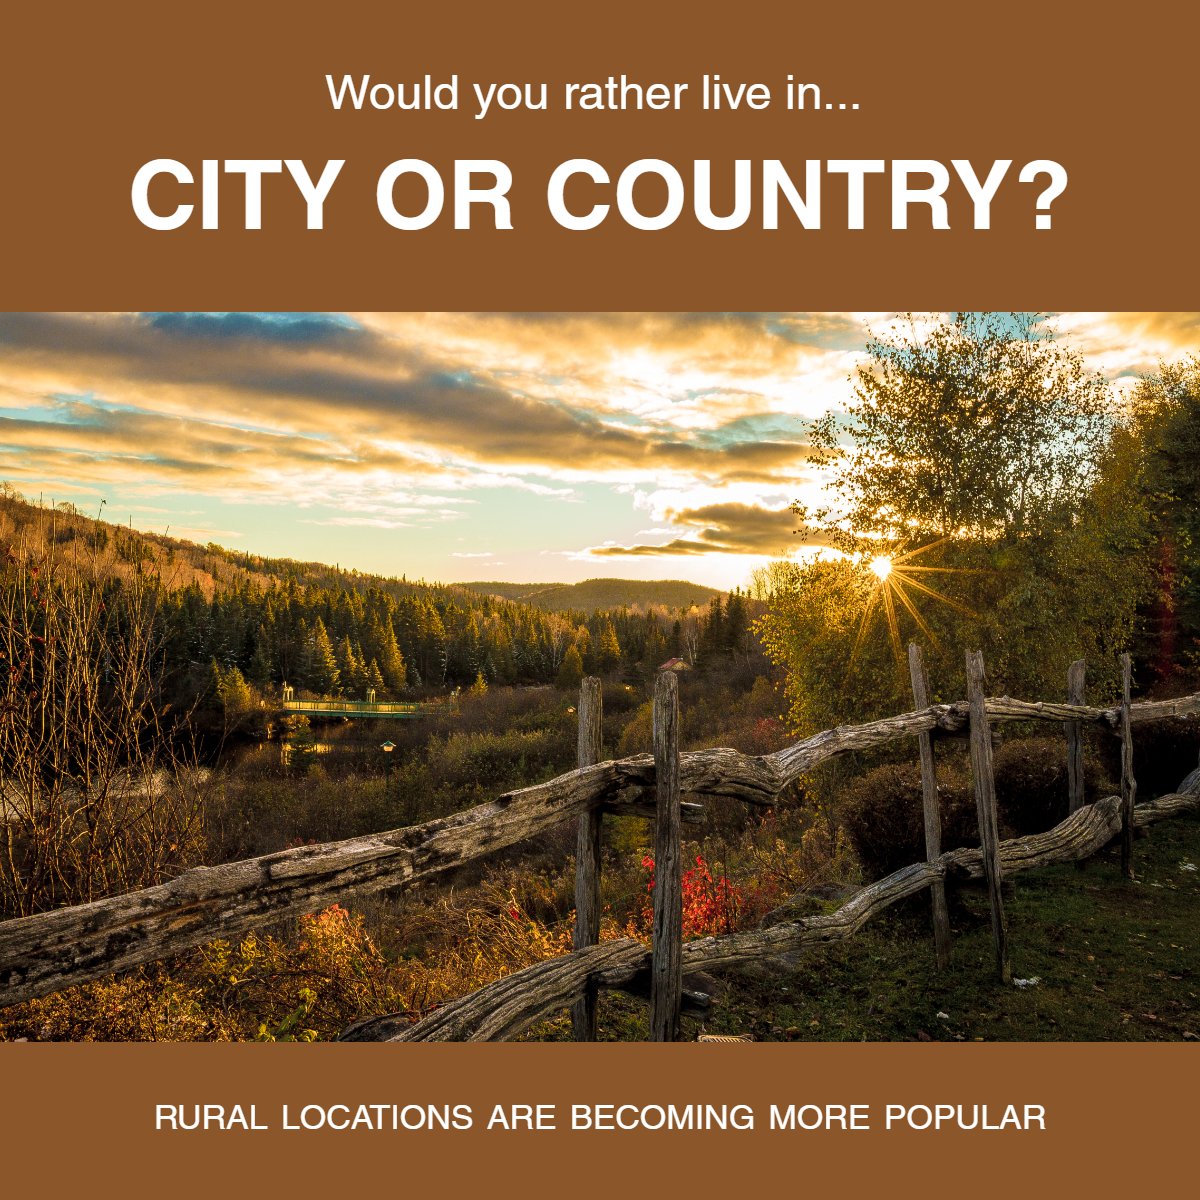 Would you rather live in the city or country? 🏙️🌄

#wouldyourather #cityorcountry #citylights #realestatequestion #realestate
 #steveladrido #ladridoteam #theladridoteam #staughomes #staugustinerealestate #staugrealtor #staugustine #realestate #realestateagent